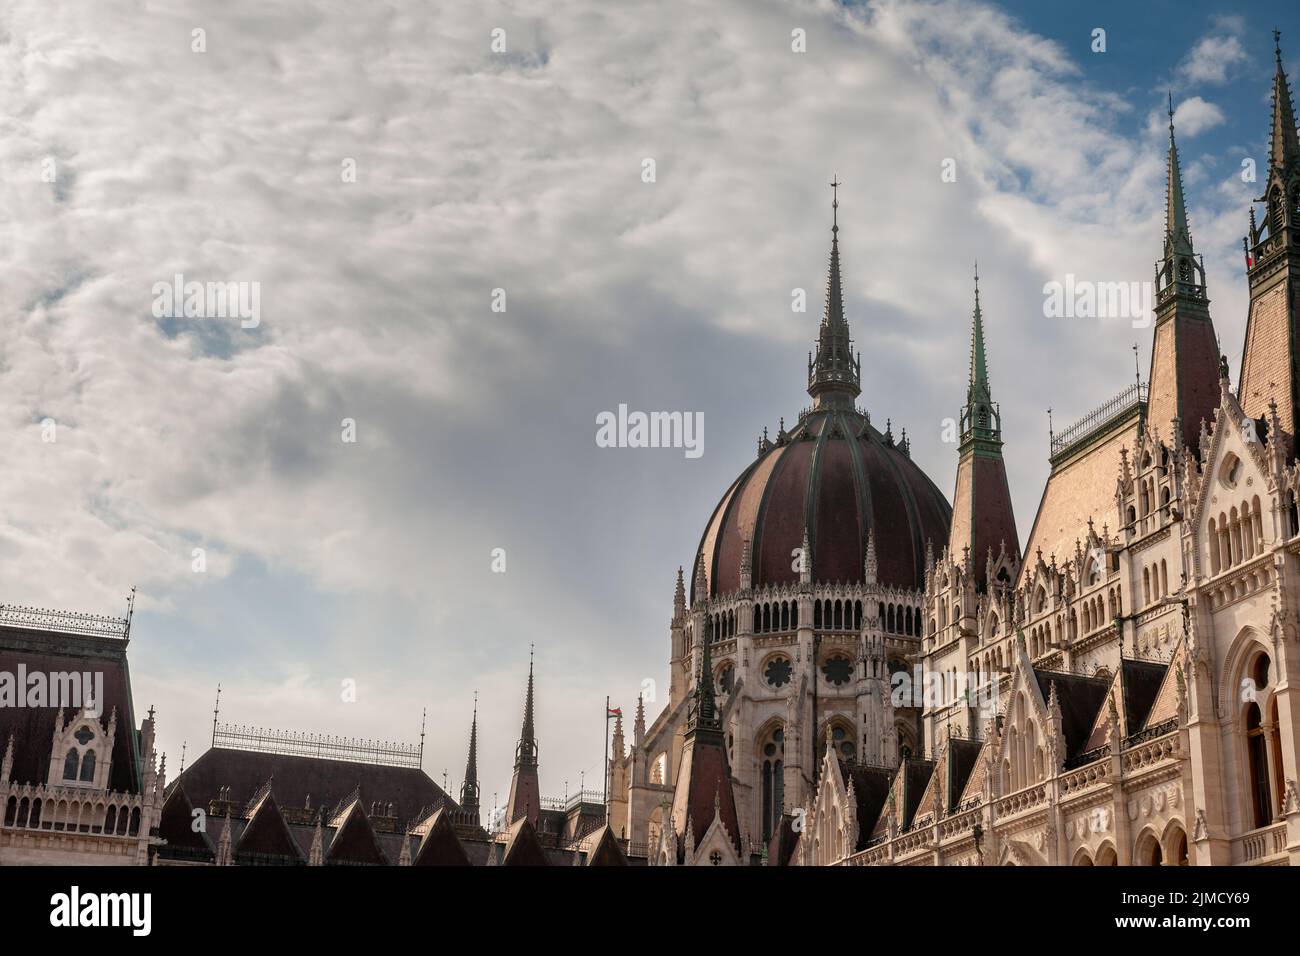 Picture of the Budapest parliament on a sunny afternoon in budapest, Hungary. The Hungarian Parliament Building, also known as the Parliament of Budap Stock Photo